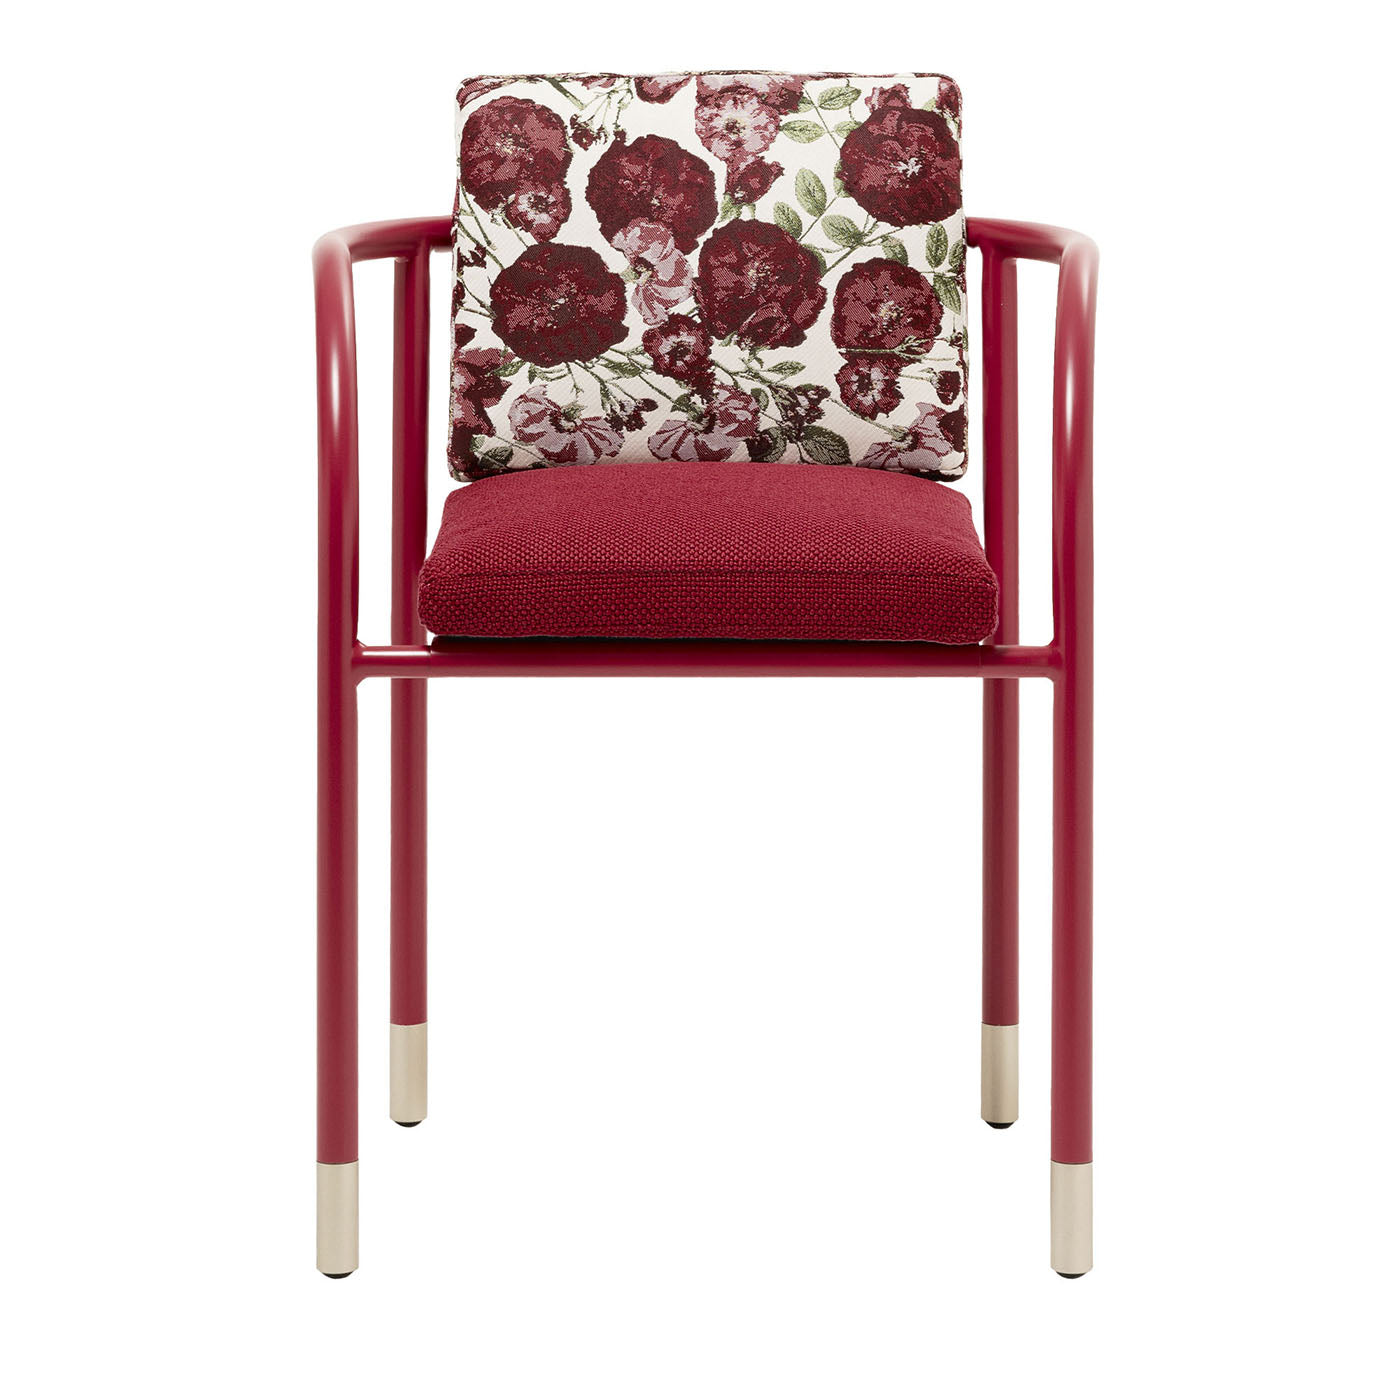 Aliya Red Outdoor Dining Chair - Main view